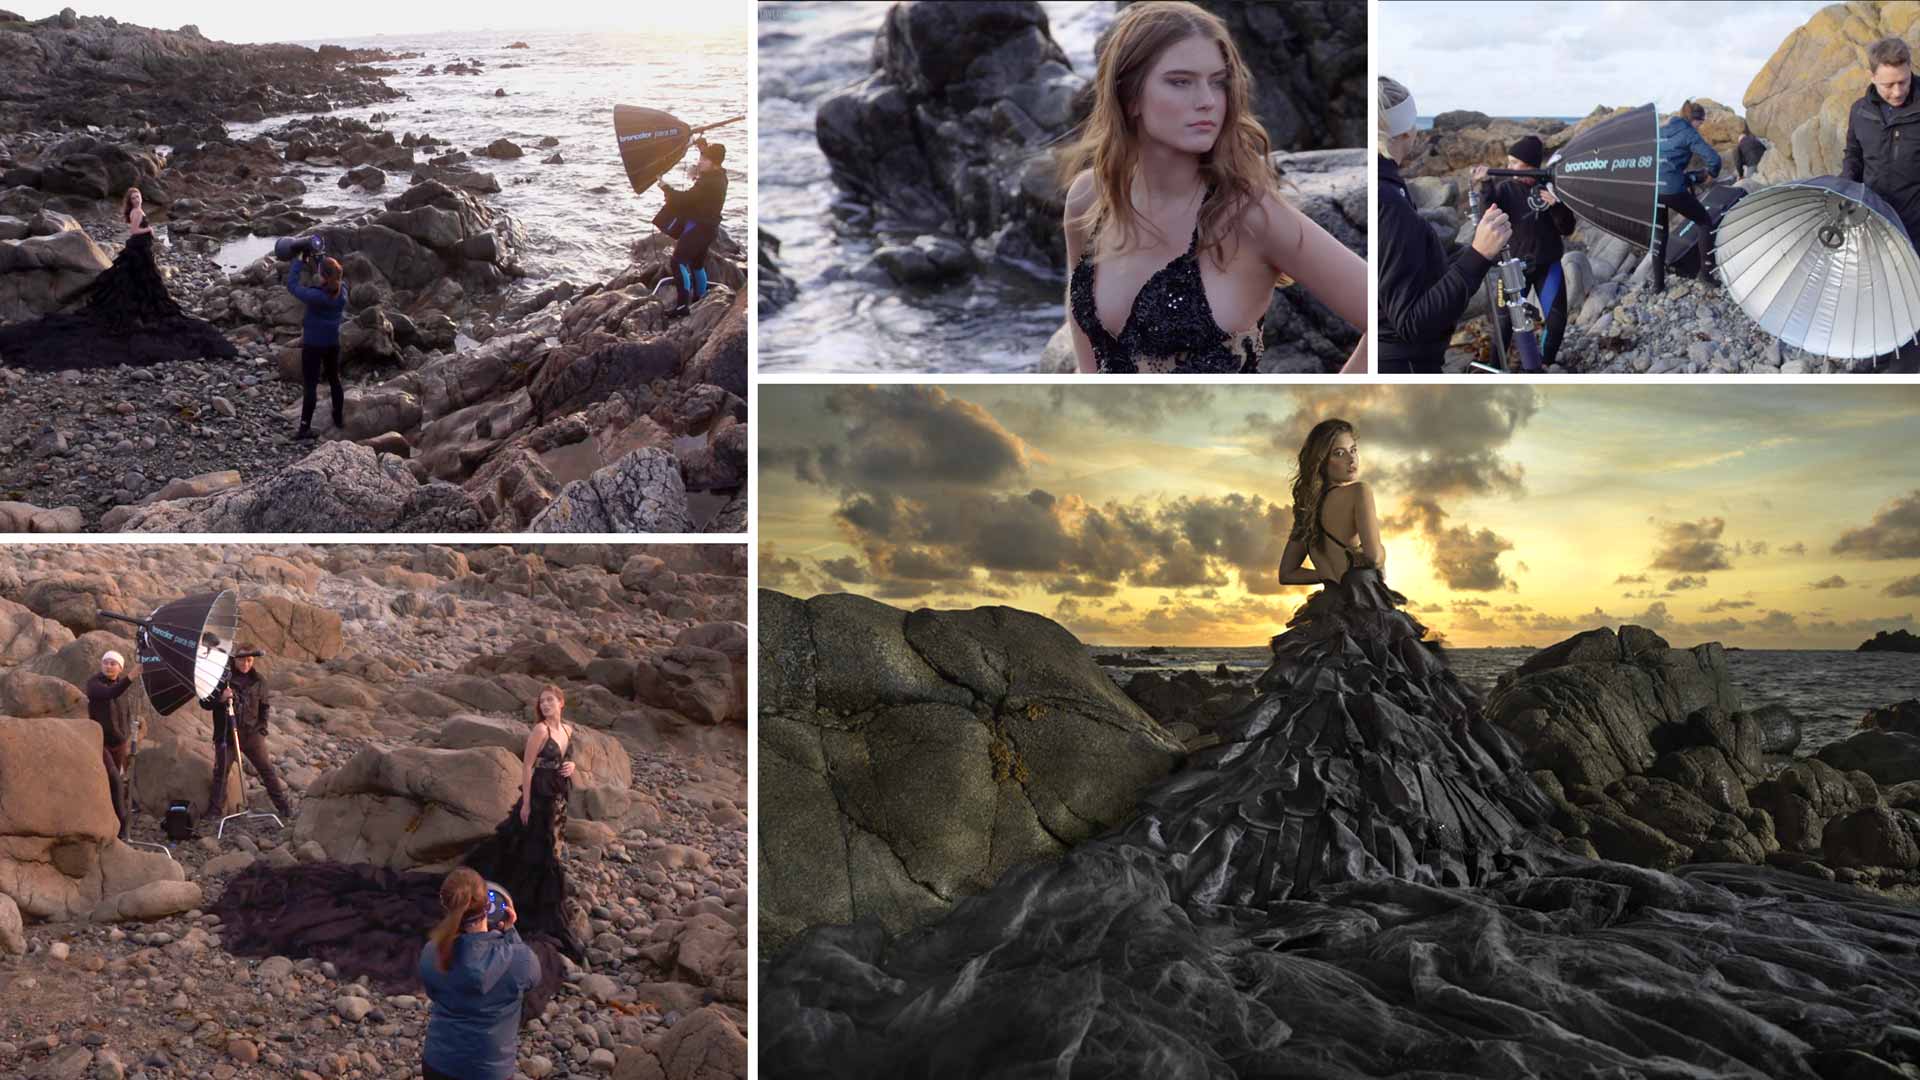 Photographing Fashion on the Coast With Flash Lighting